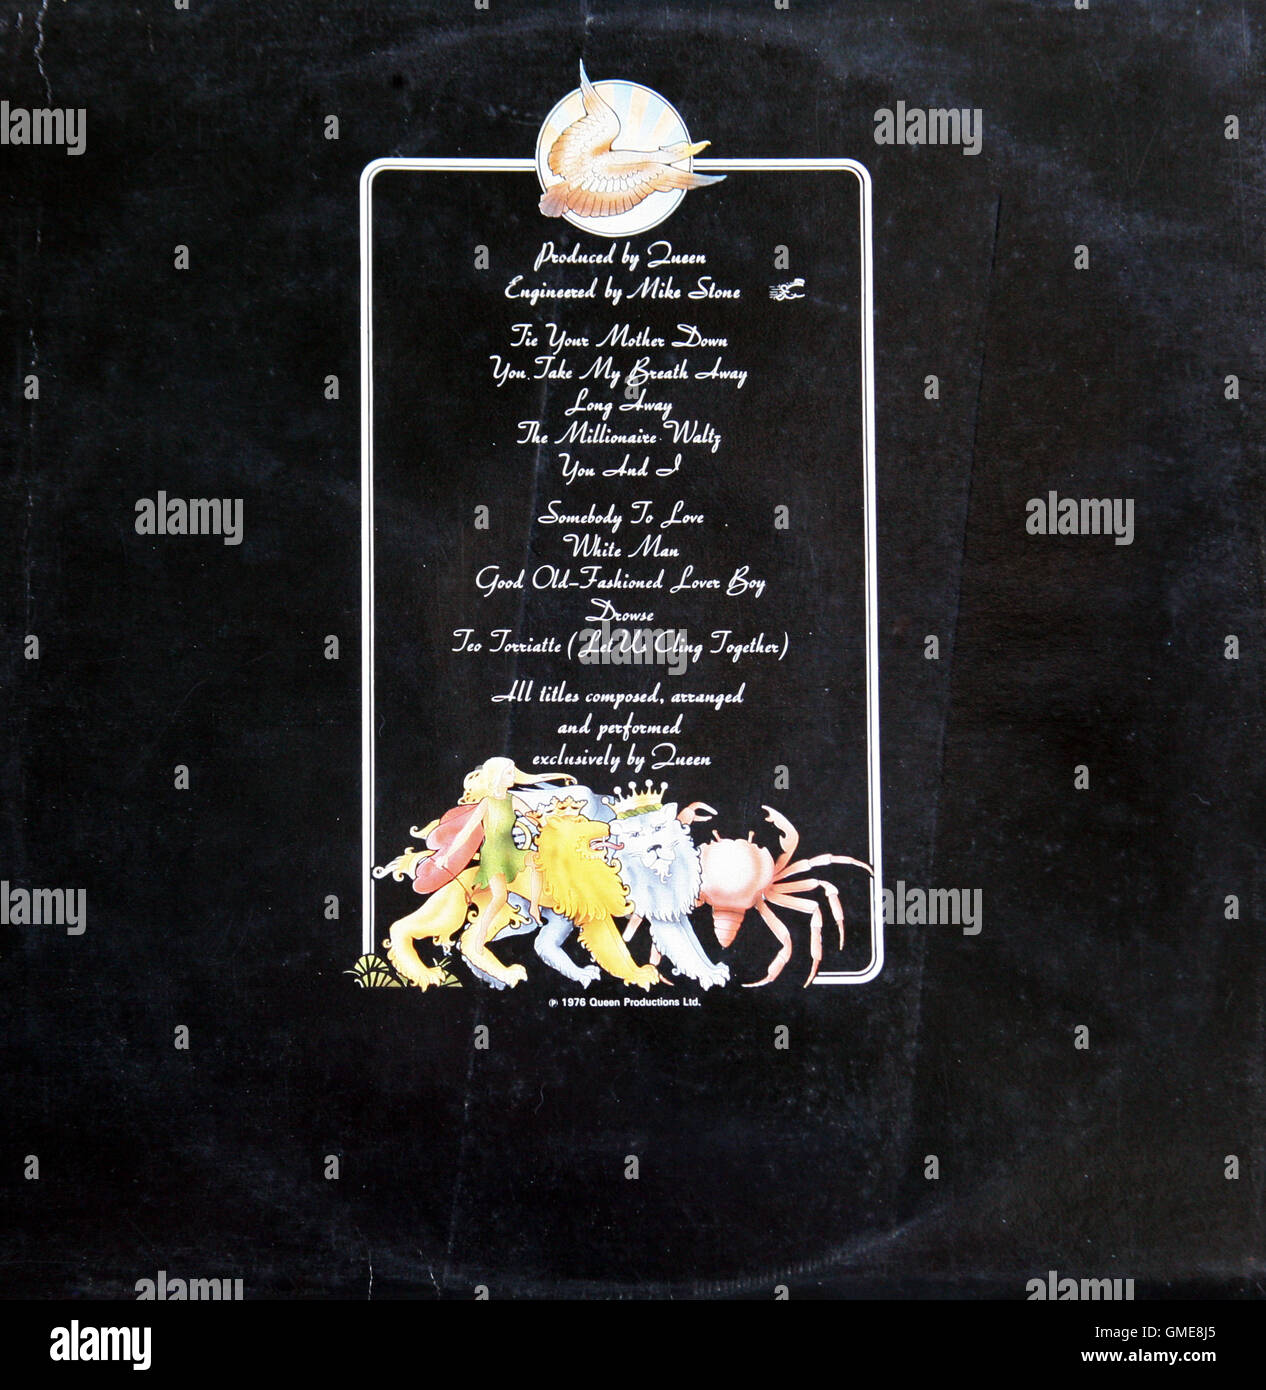 Queen: A Day At The Races, 1976., LP back side Stock Photo